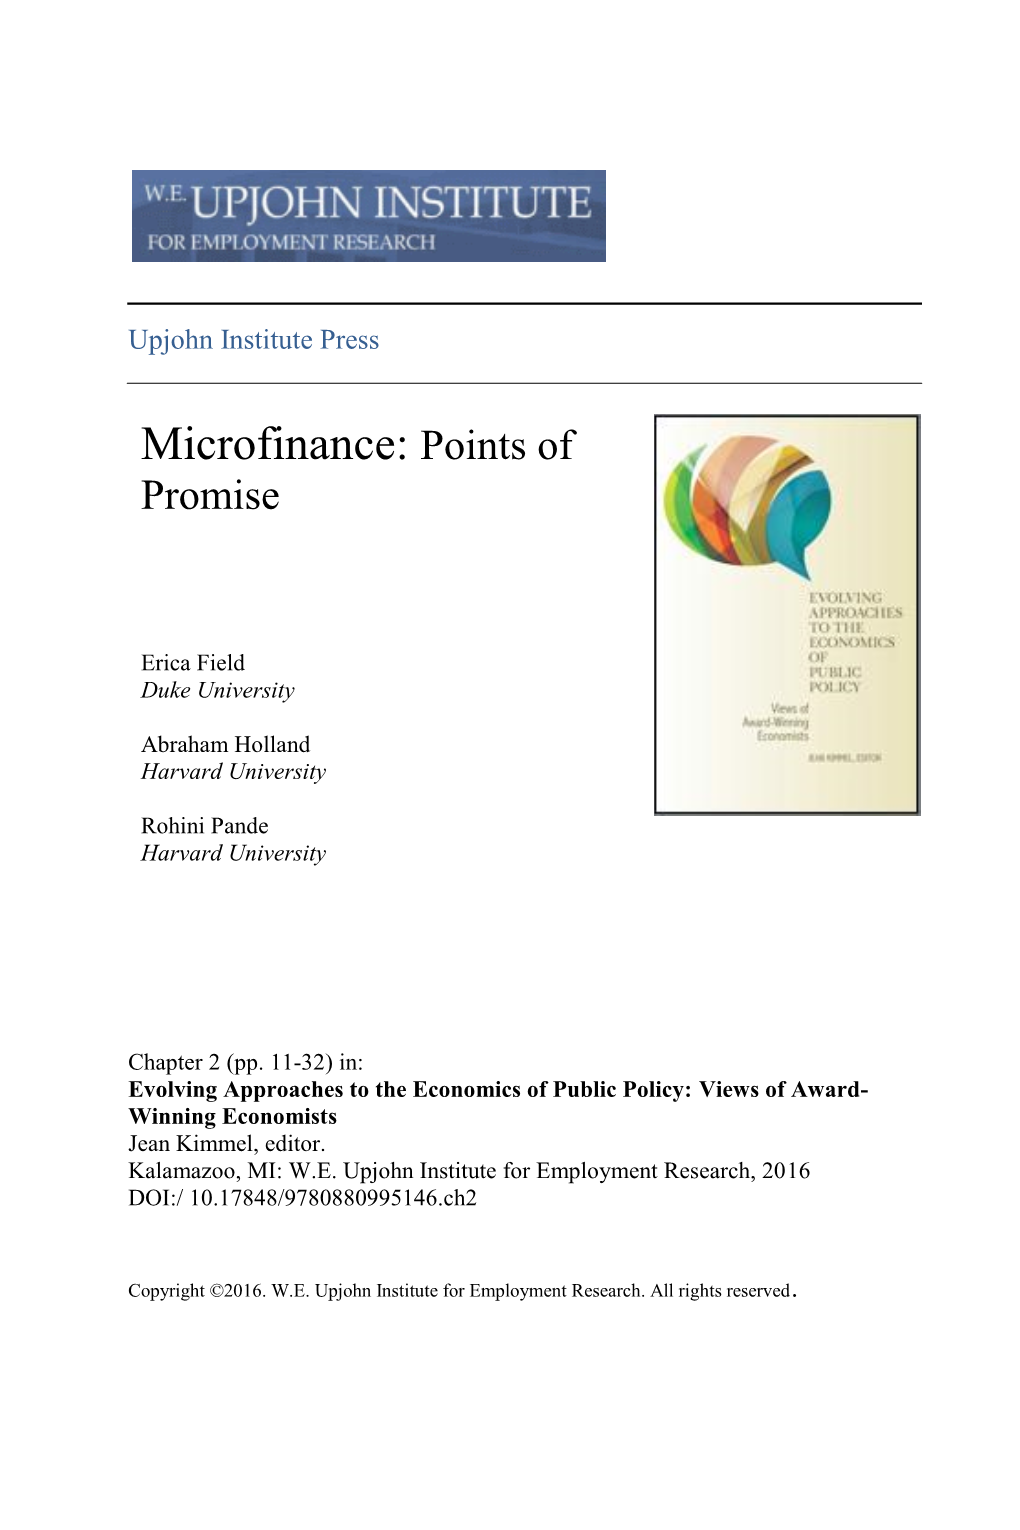 Microfinance: Points of Promise